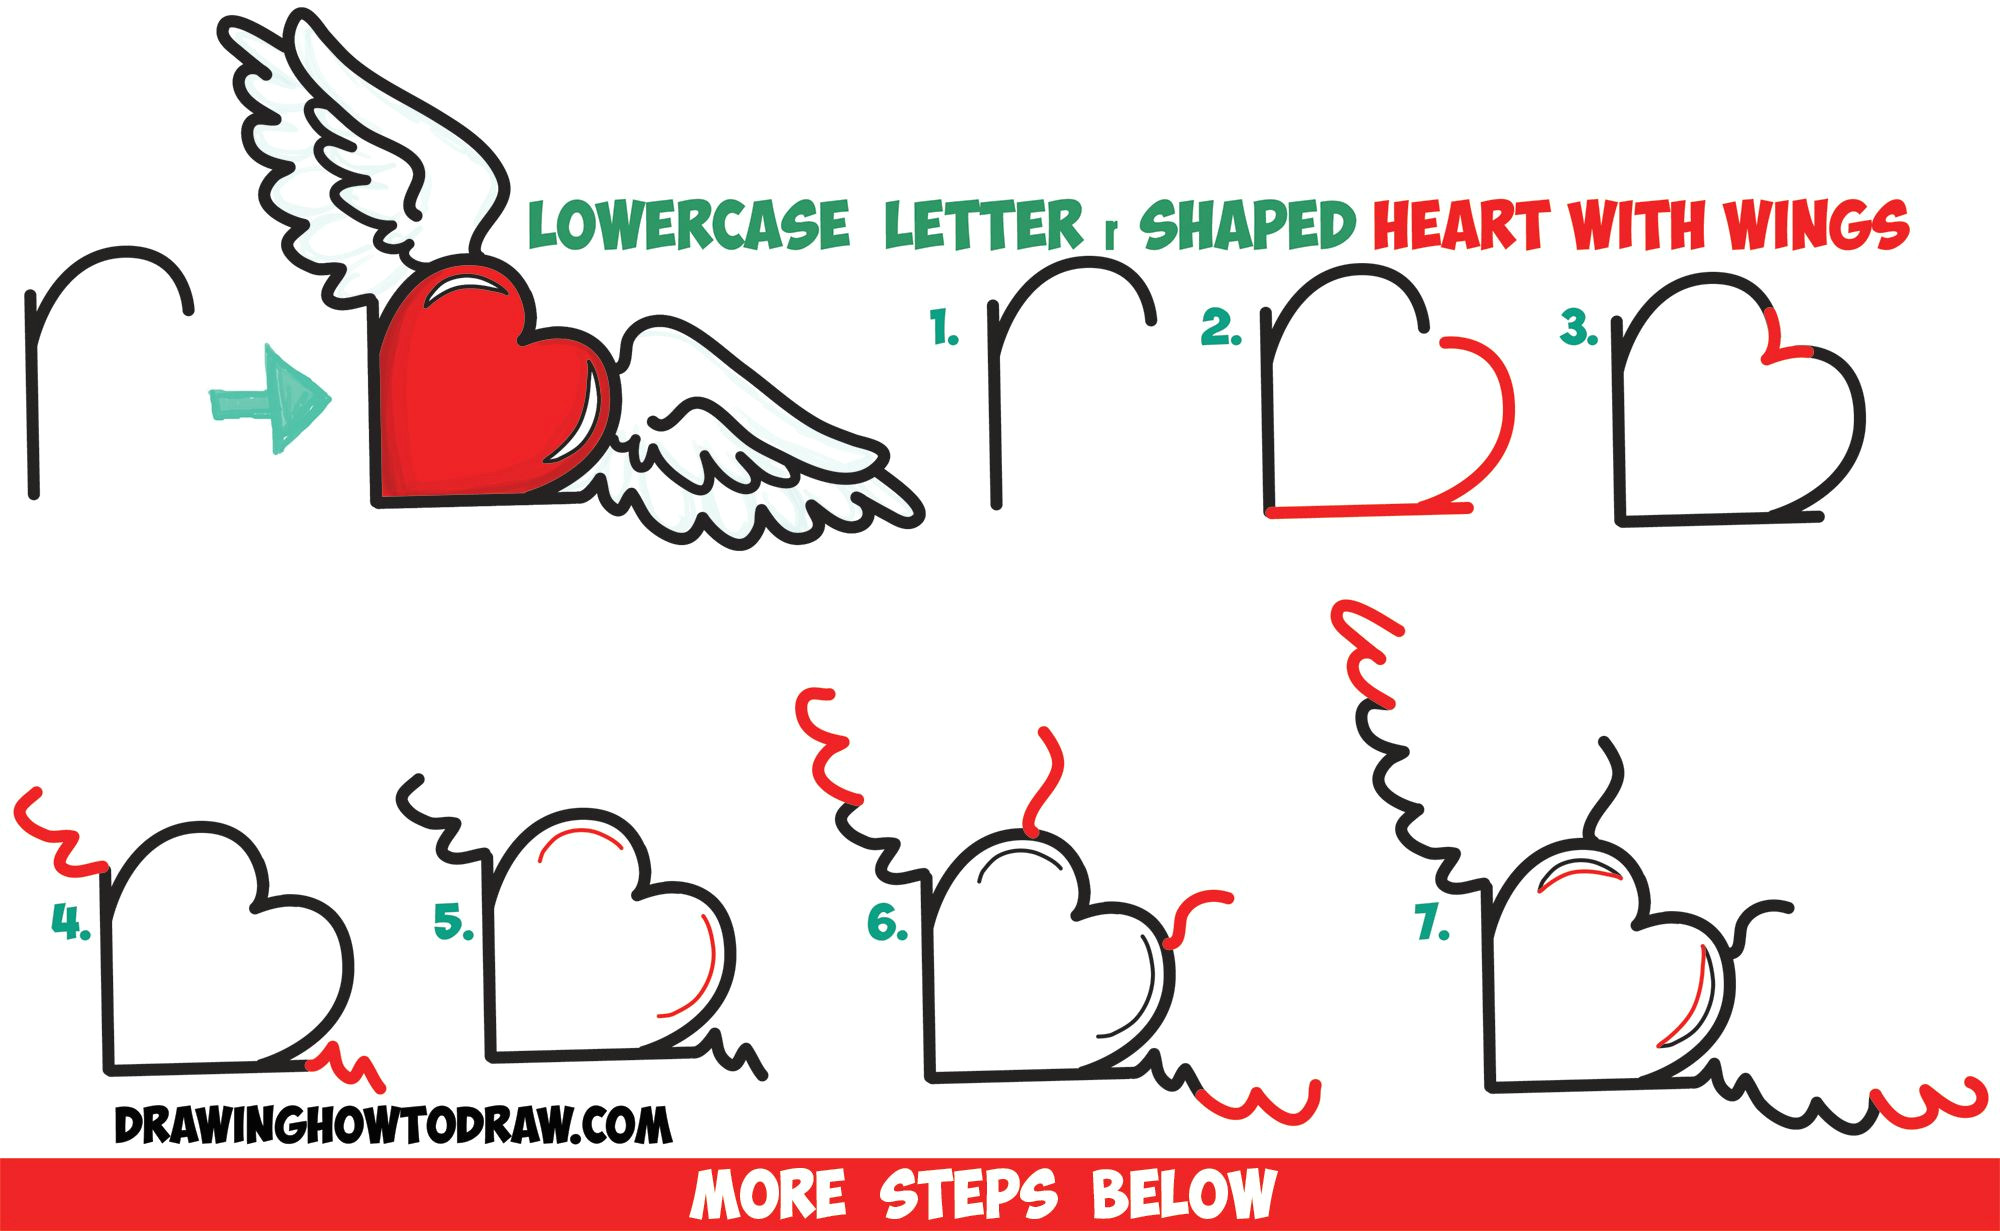 Drawing A Heart Step by Step How to Draw Heart with Wings From Lowercase Letter R Shapes Easy